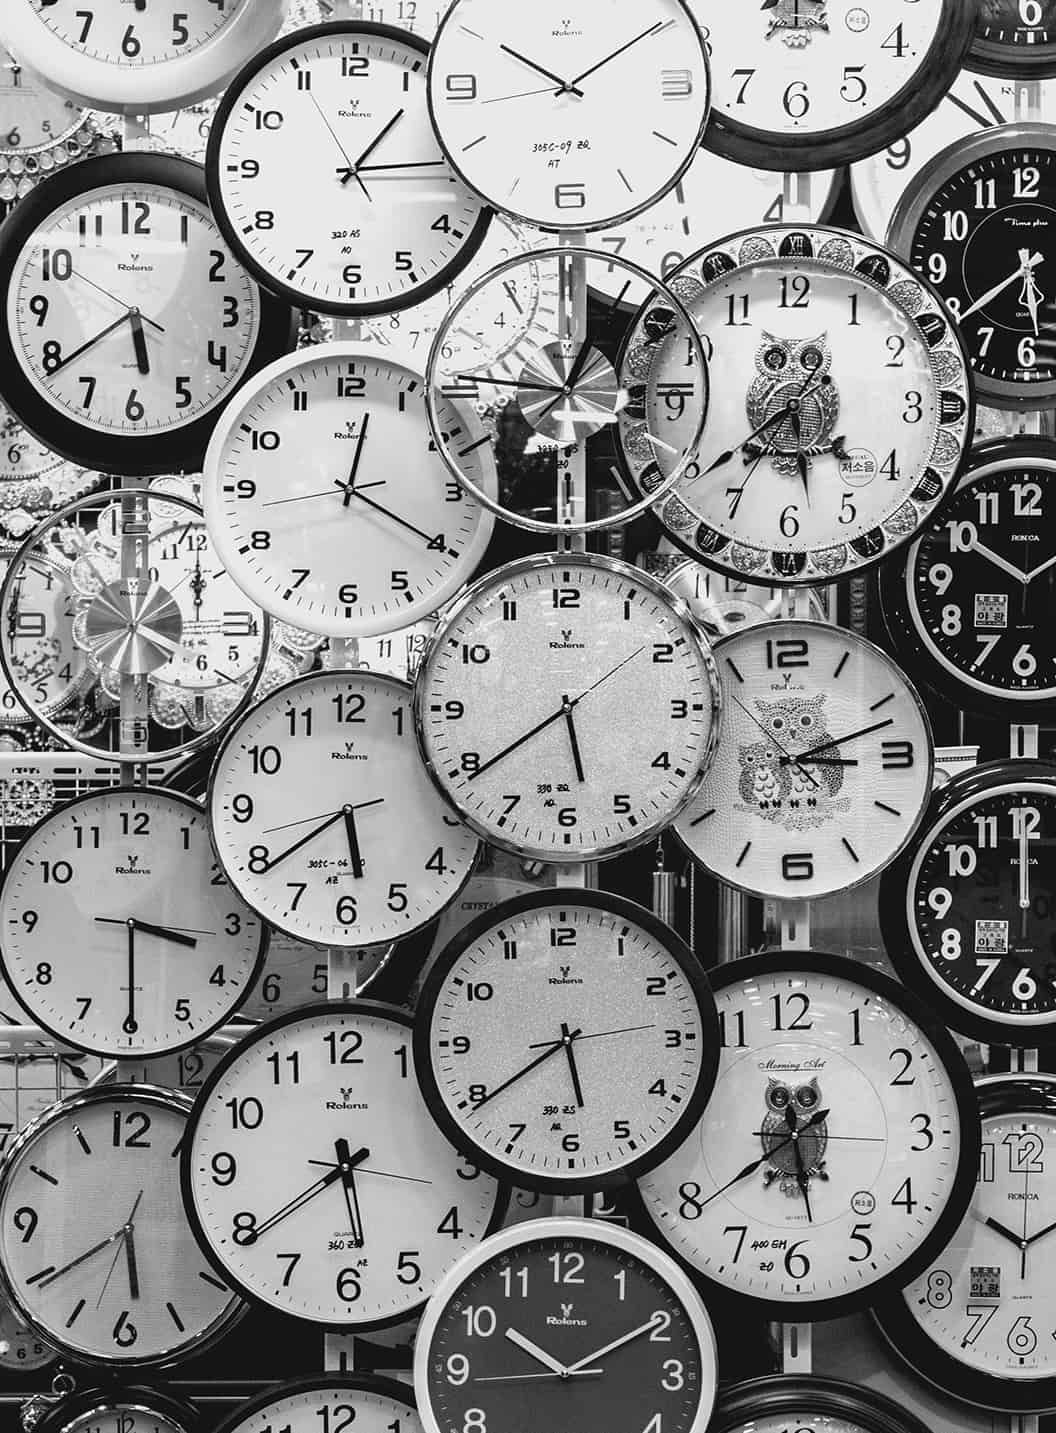 main_ is it too late_black-and-white-black-and-white-clocks-707676